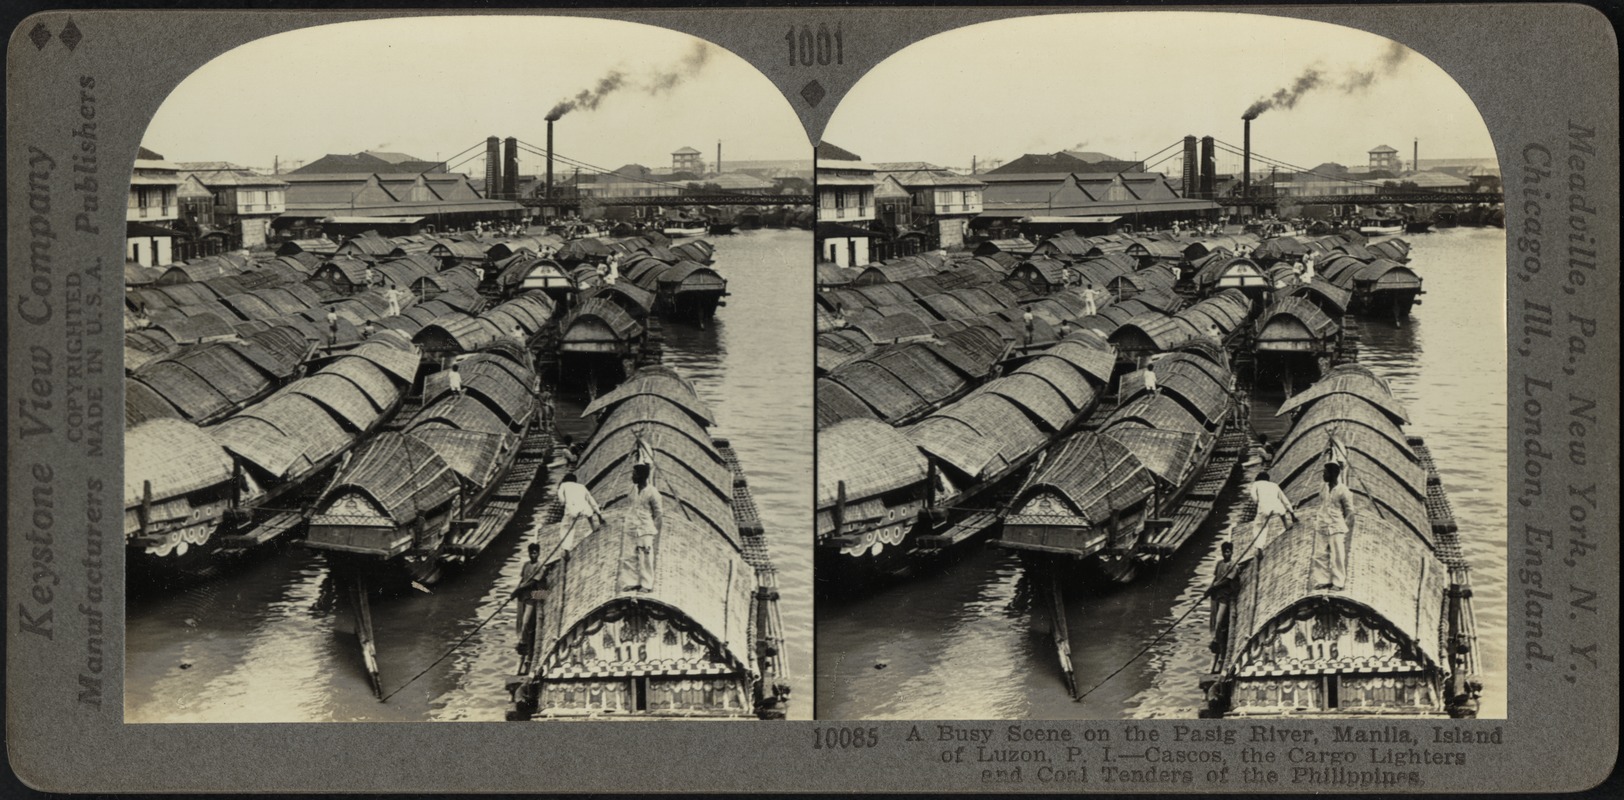 Filipino cascoes, or freight boats, on the river front of Manila, P.I.